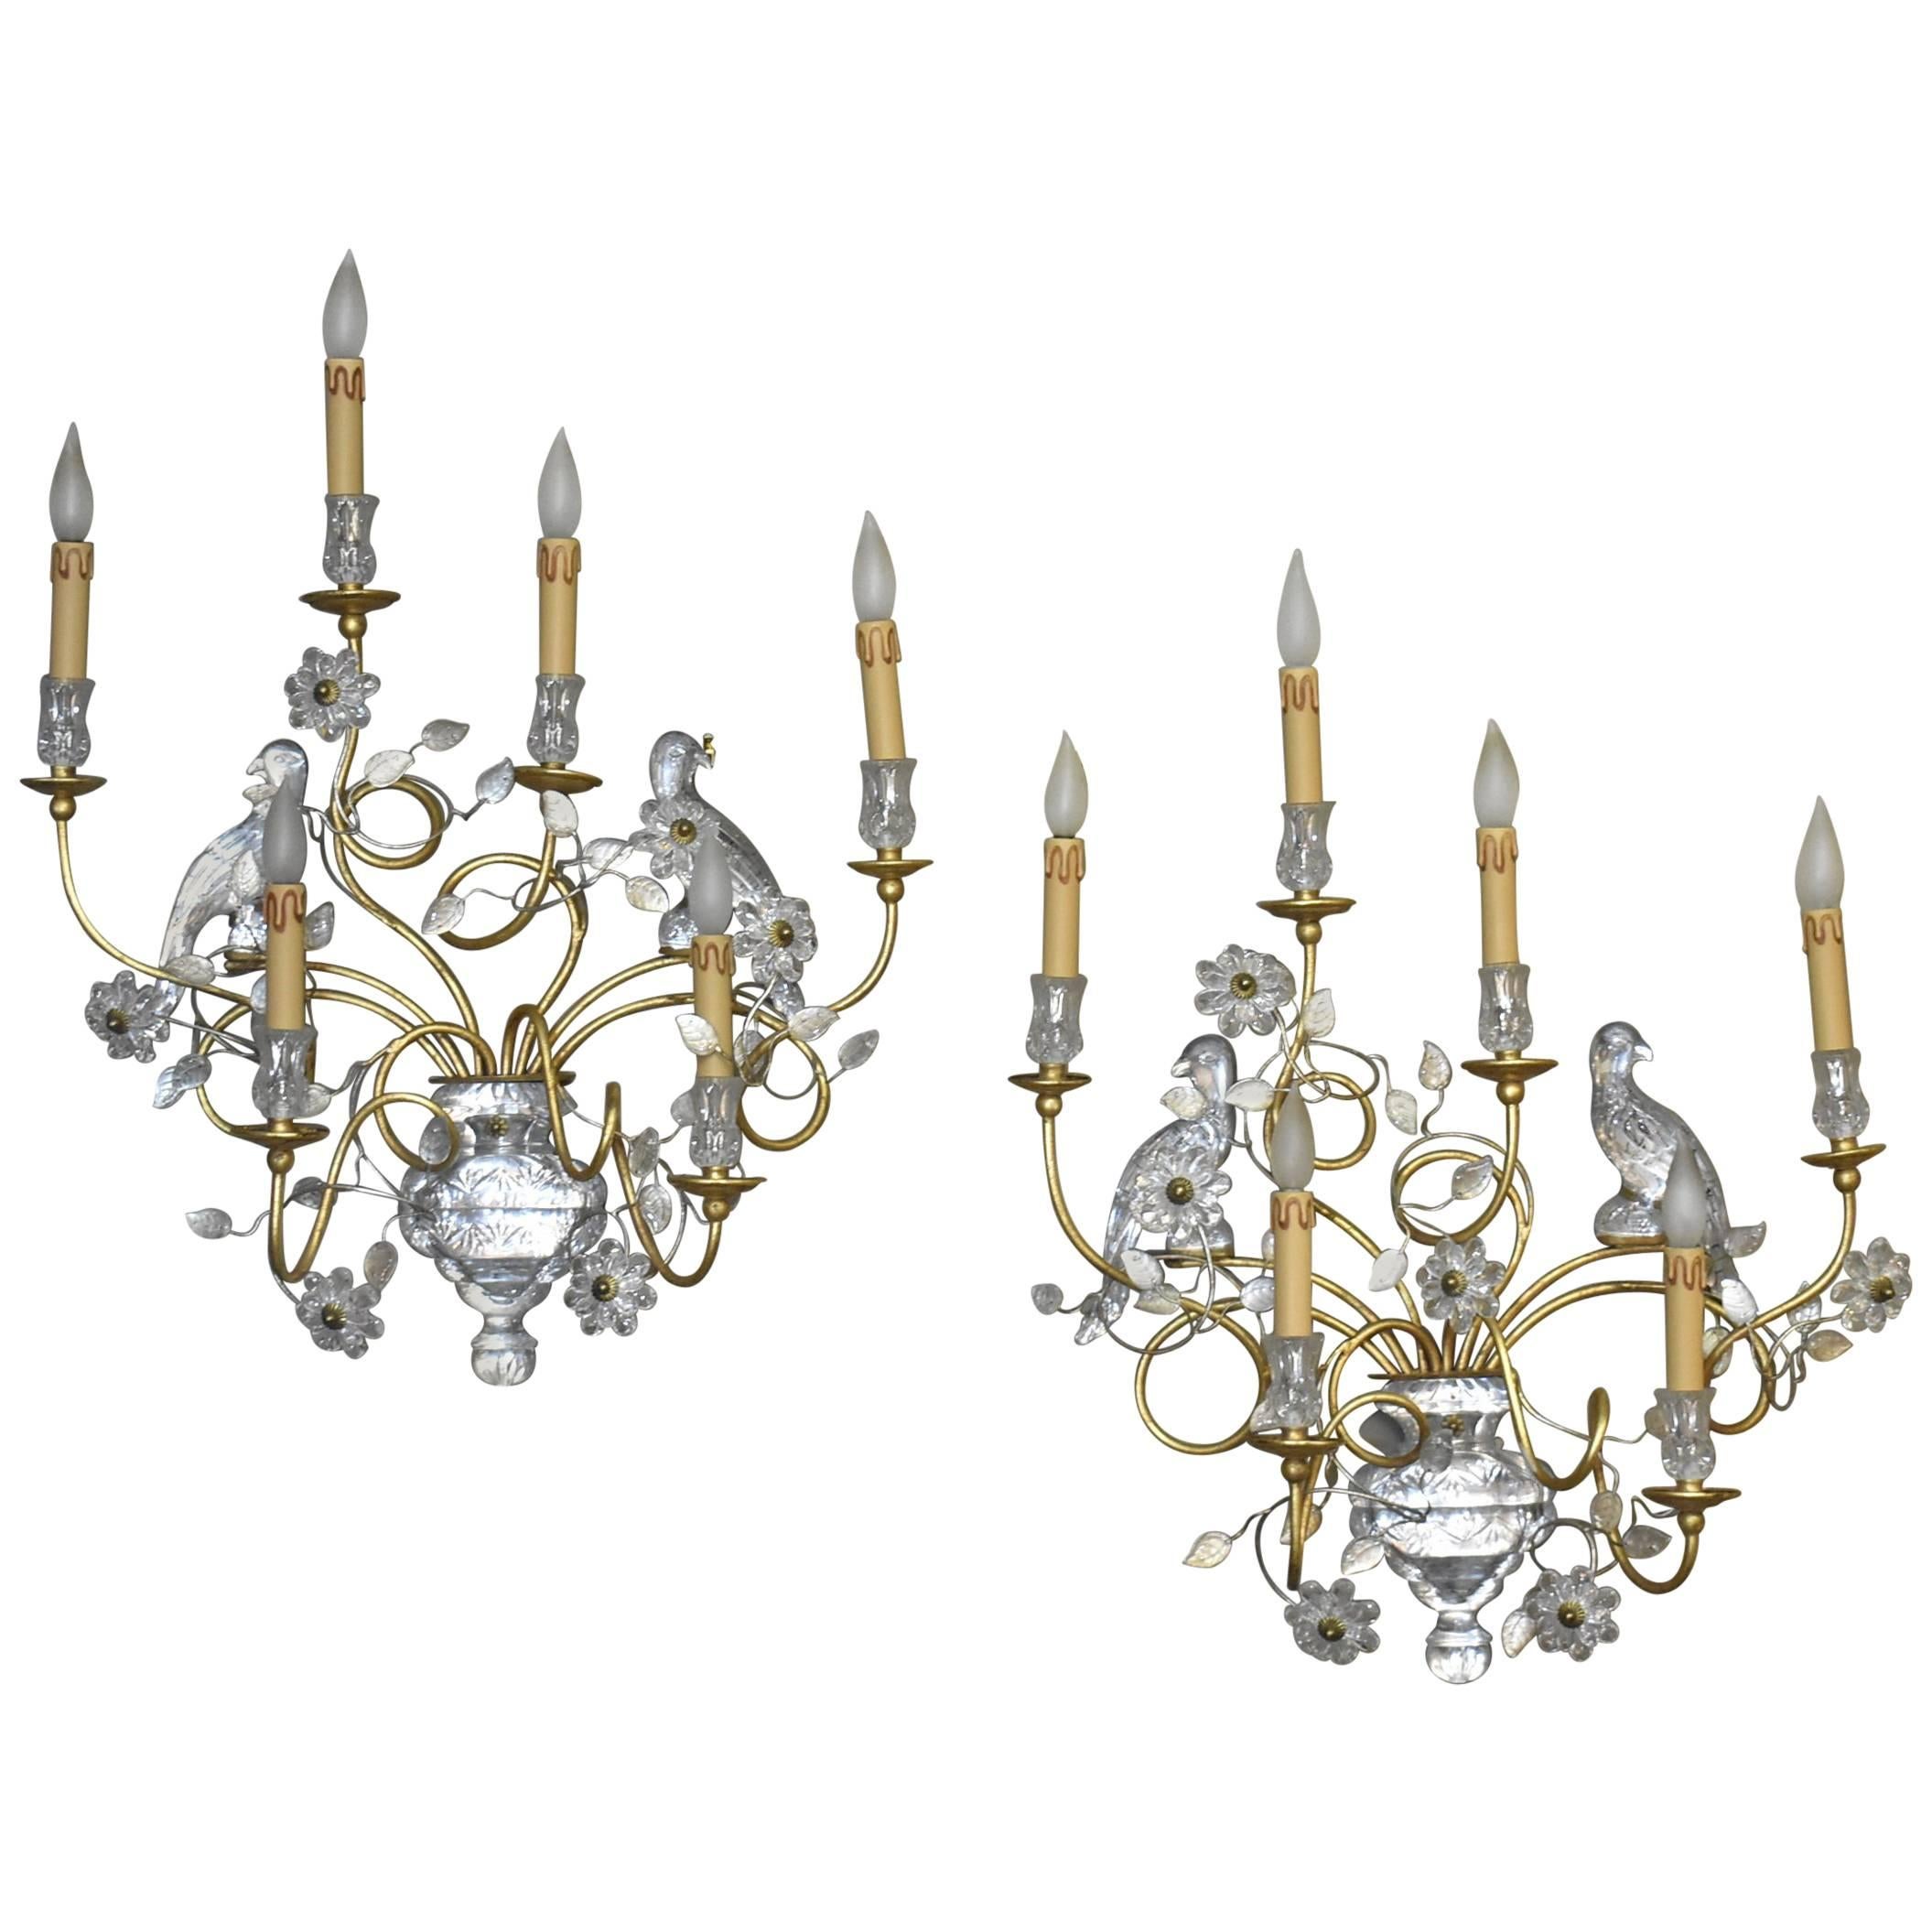 Pair of Italian Crystal and Gold Gilt Parrot Wall Sconces by Banci